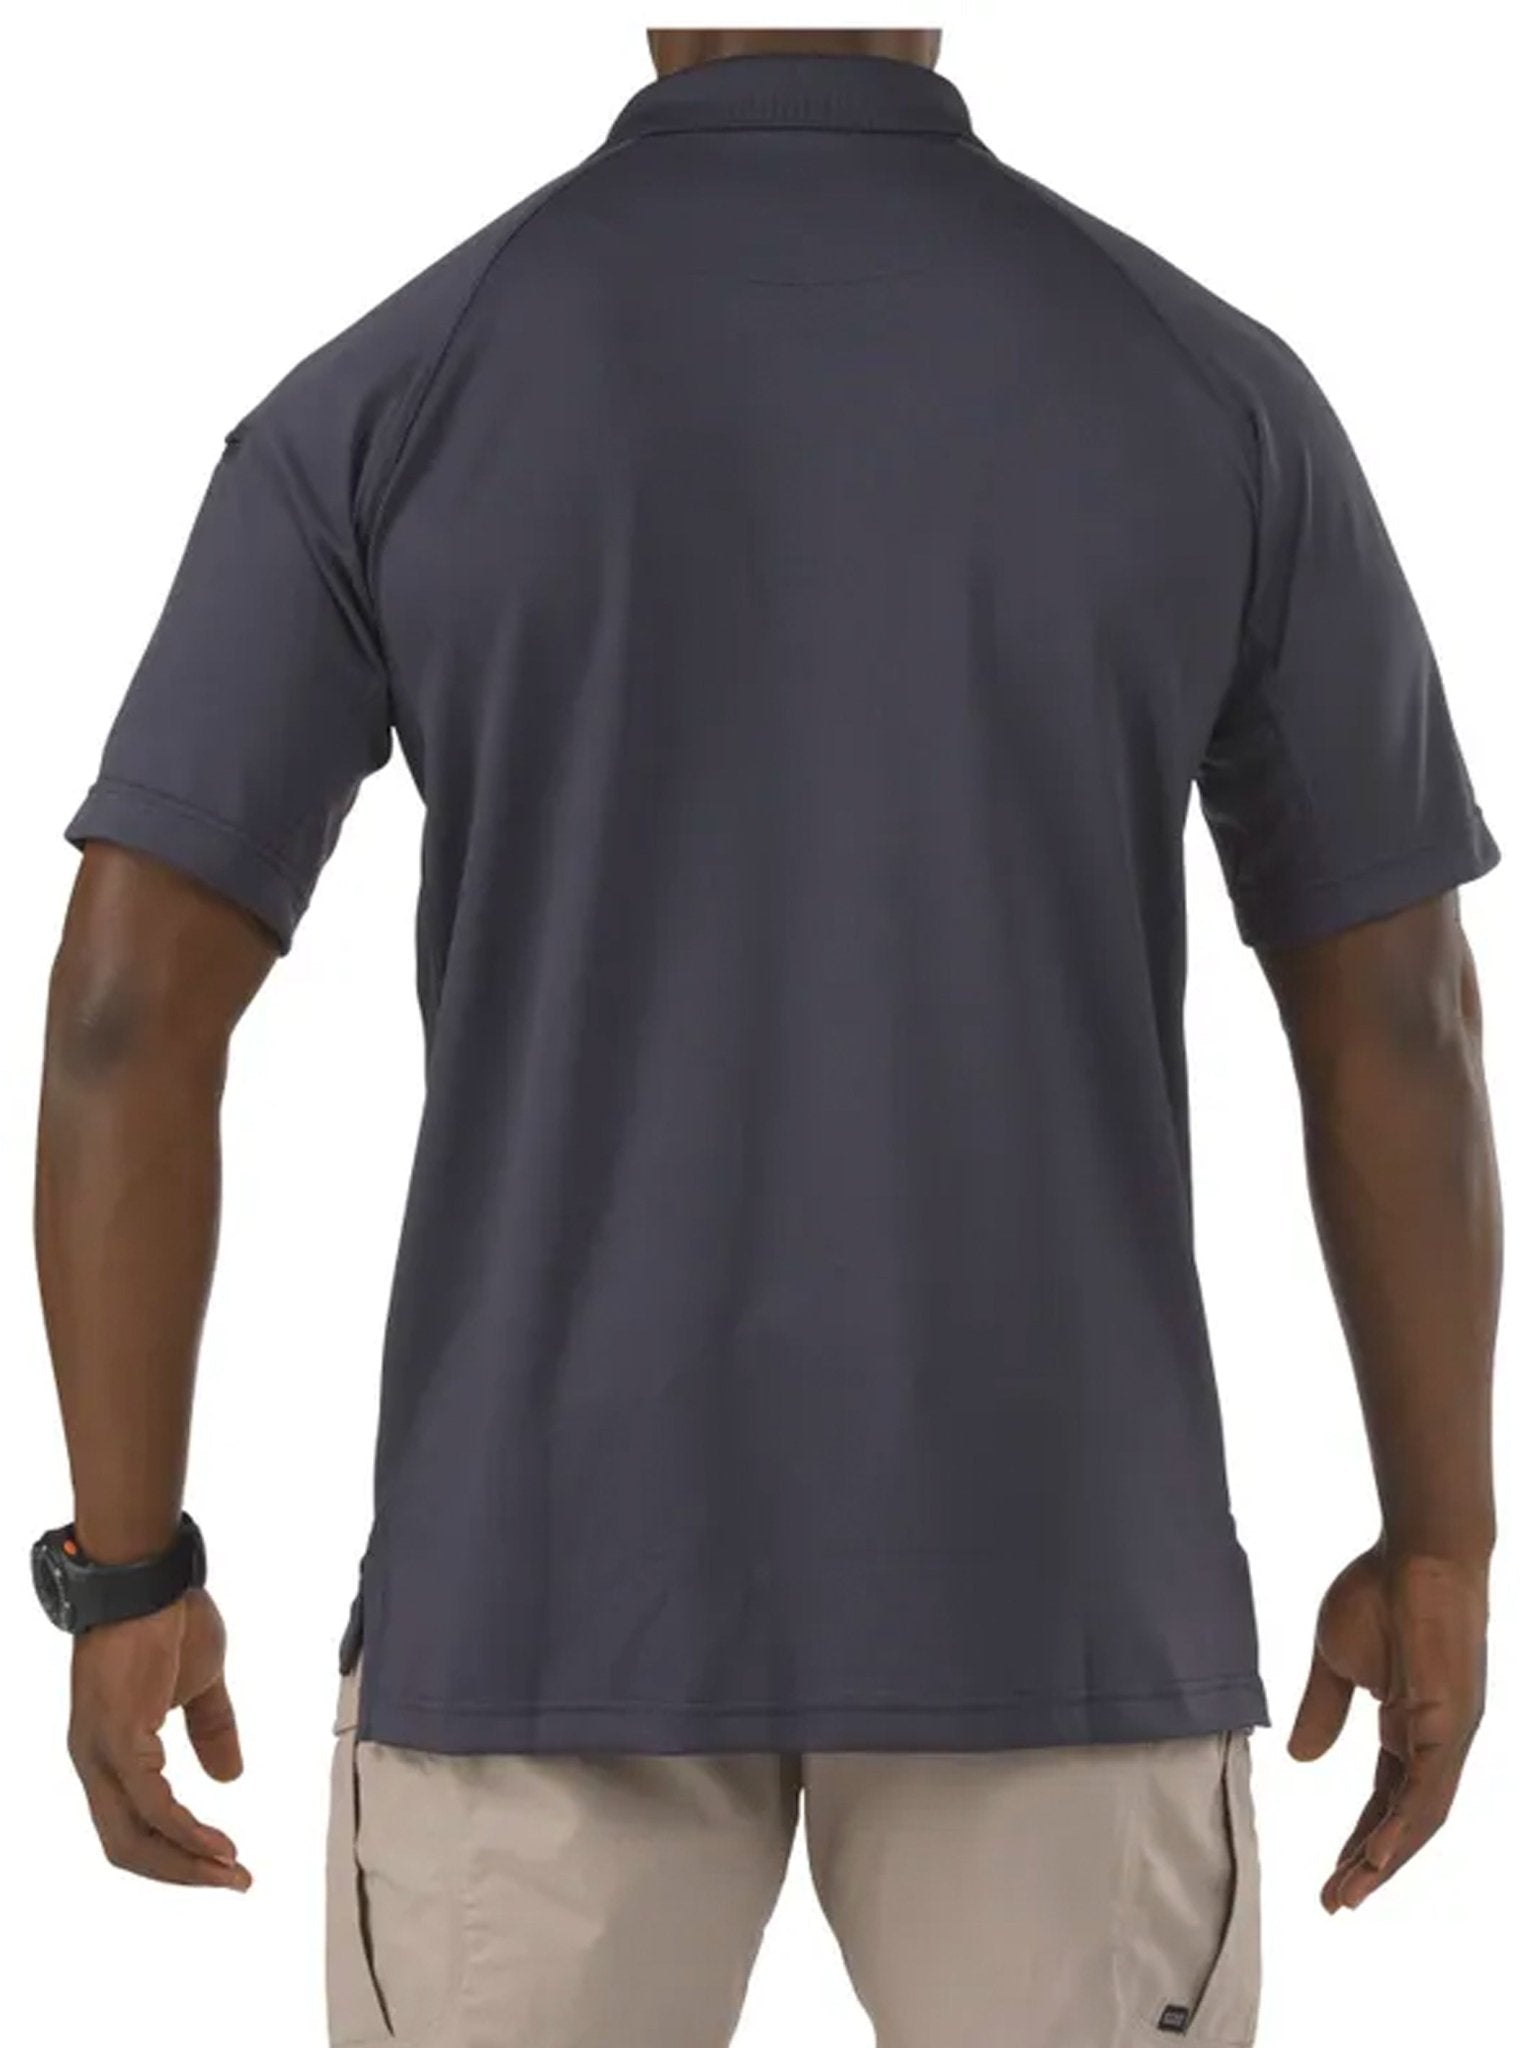 4elementsclothing5.11 Tactical5.11 Tactical - 5.11 Performance Short Sleeve Polo Shirt - Quick Dry moisture wicking - Style 71049T-Shirt71049-018-XS